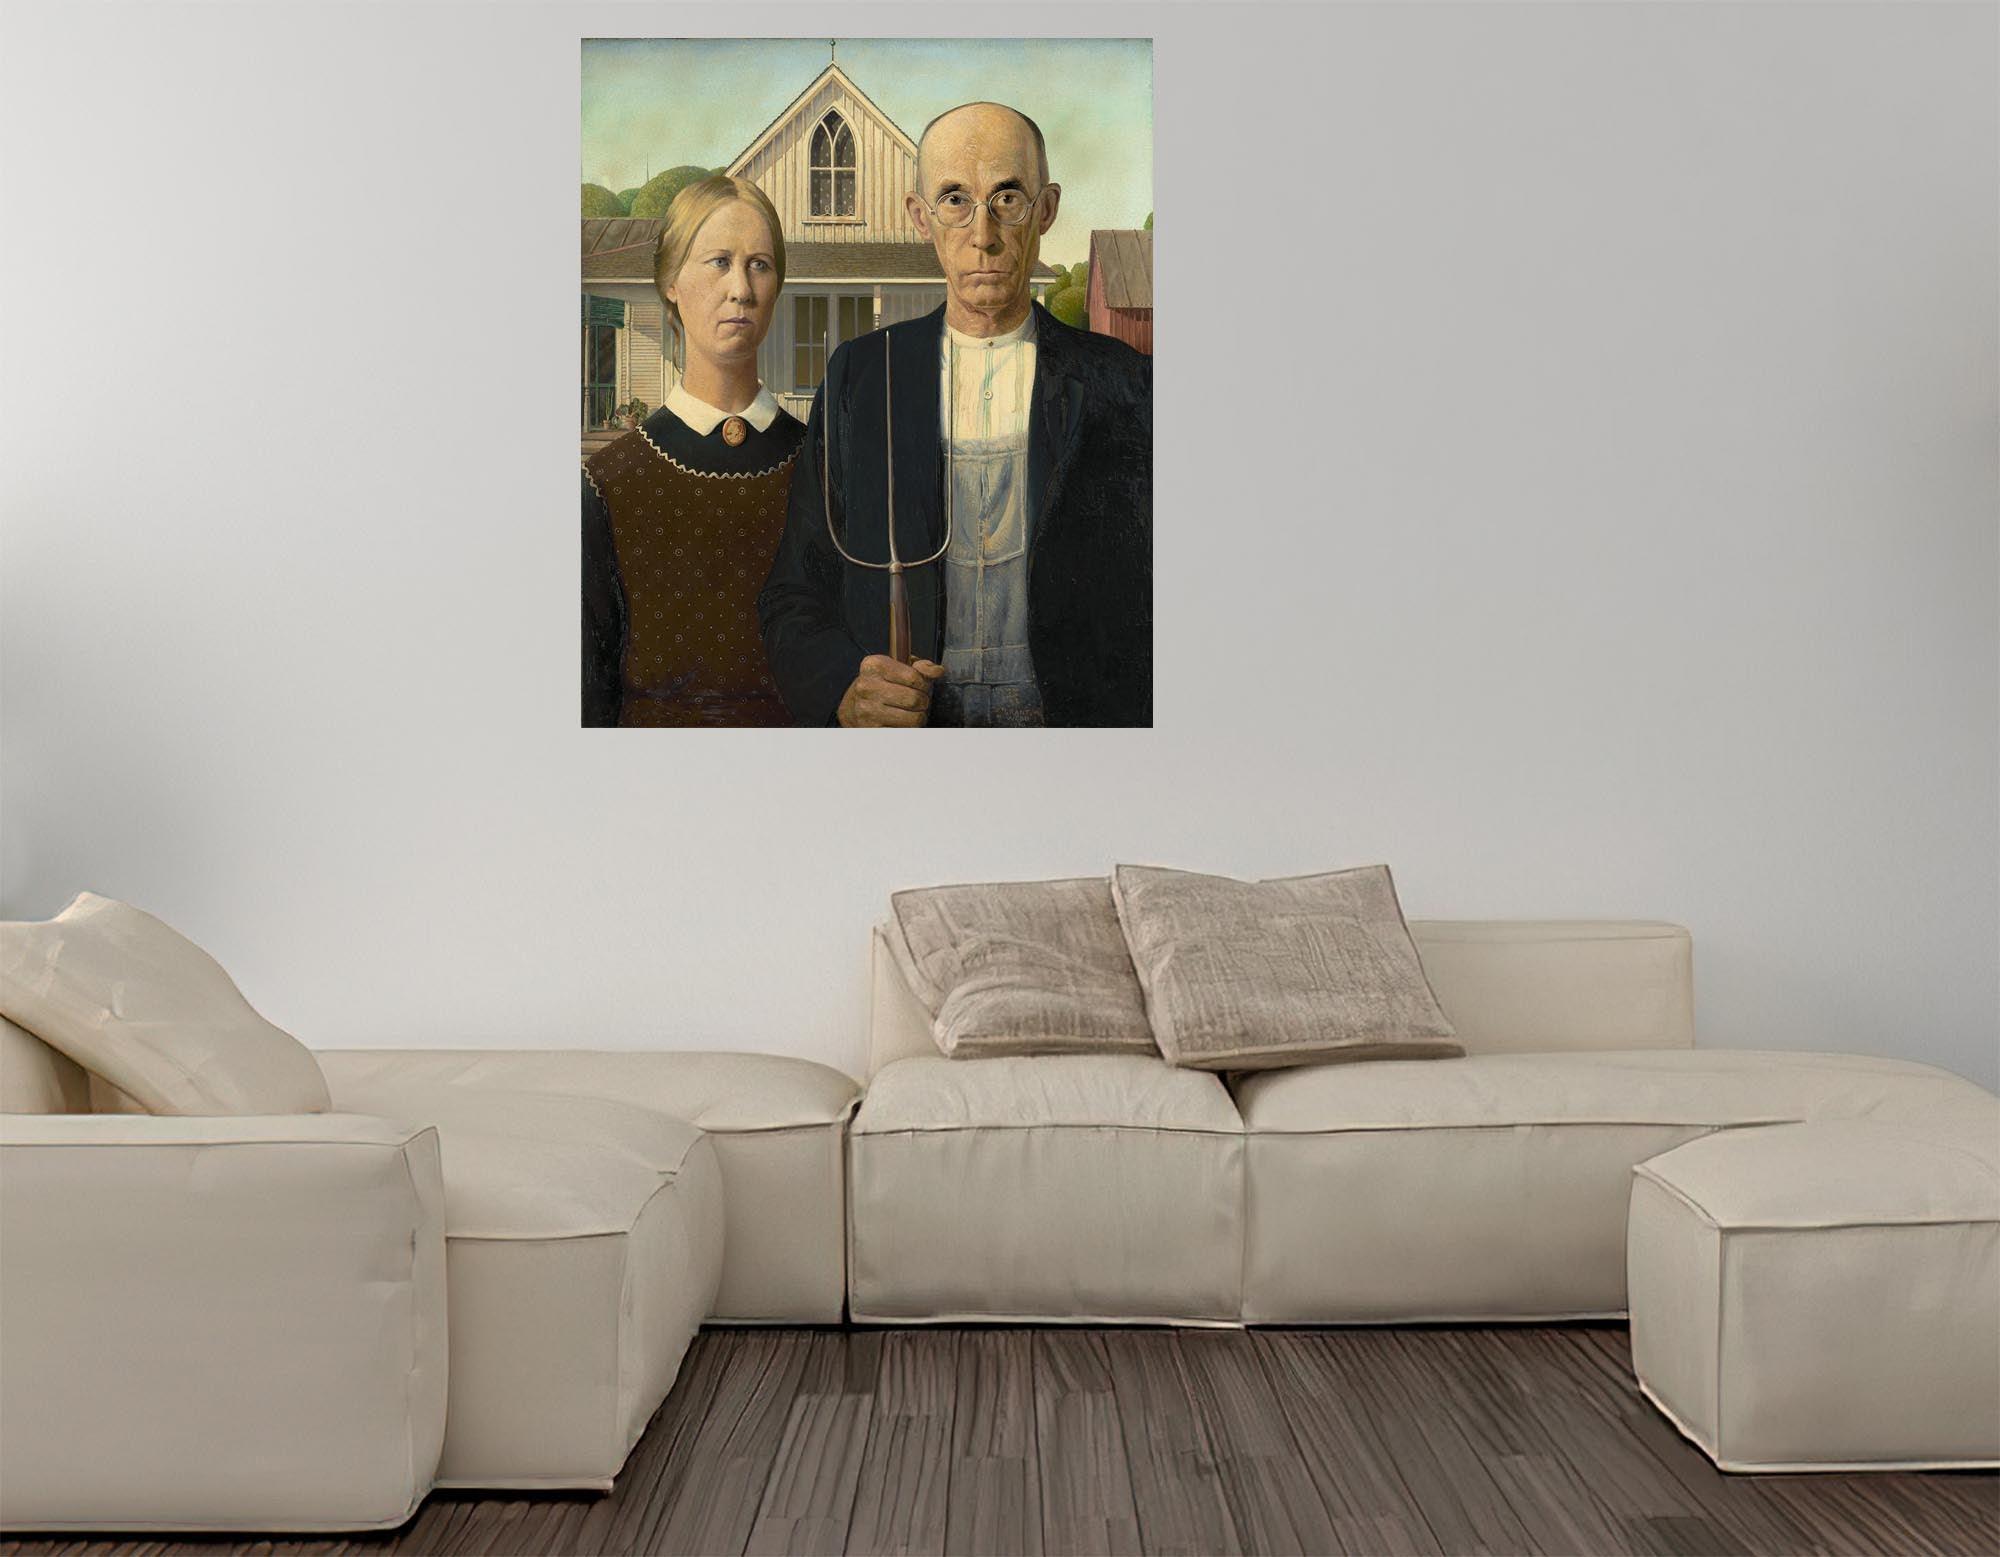 CoolWalls.ca Posters, Prints, & Visual Artwork American Gothic Grant Wood 1930 Vintage Artwork: Peel_n_Stick onto the wall, wallpaper like fabric